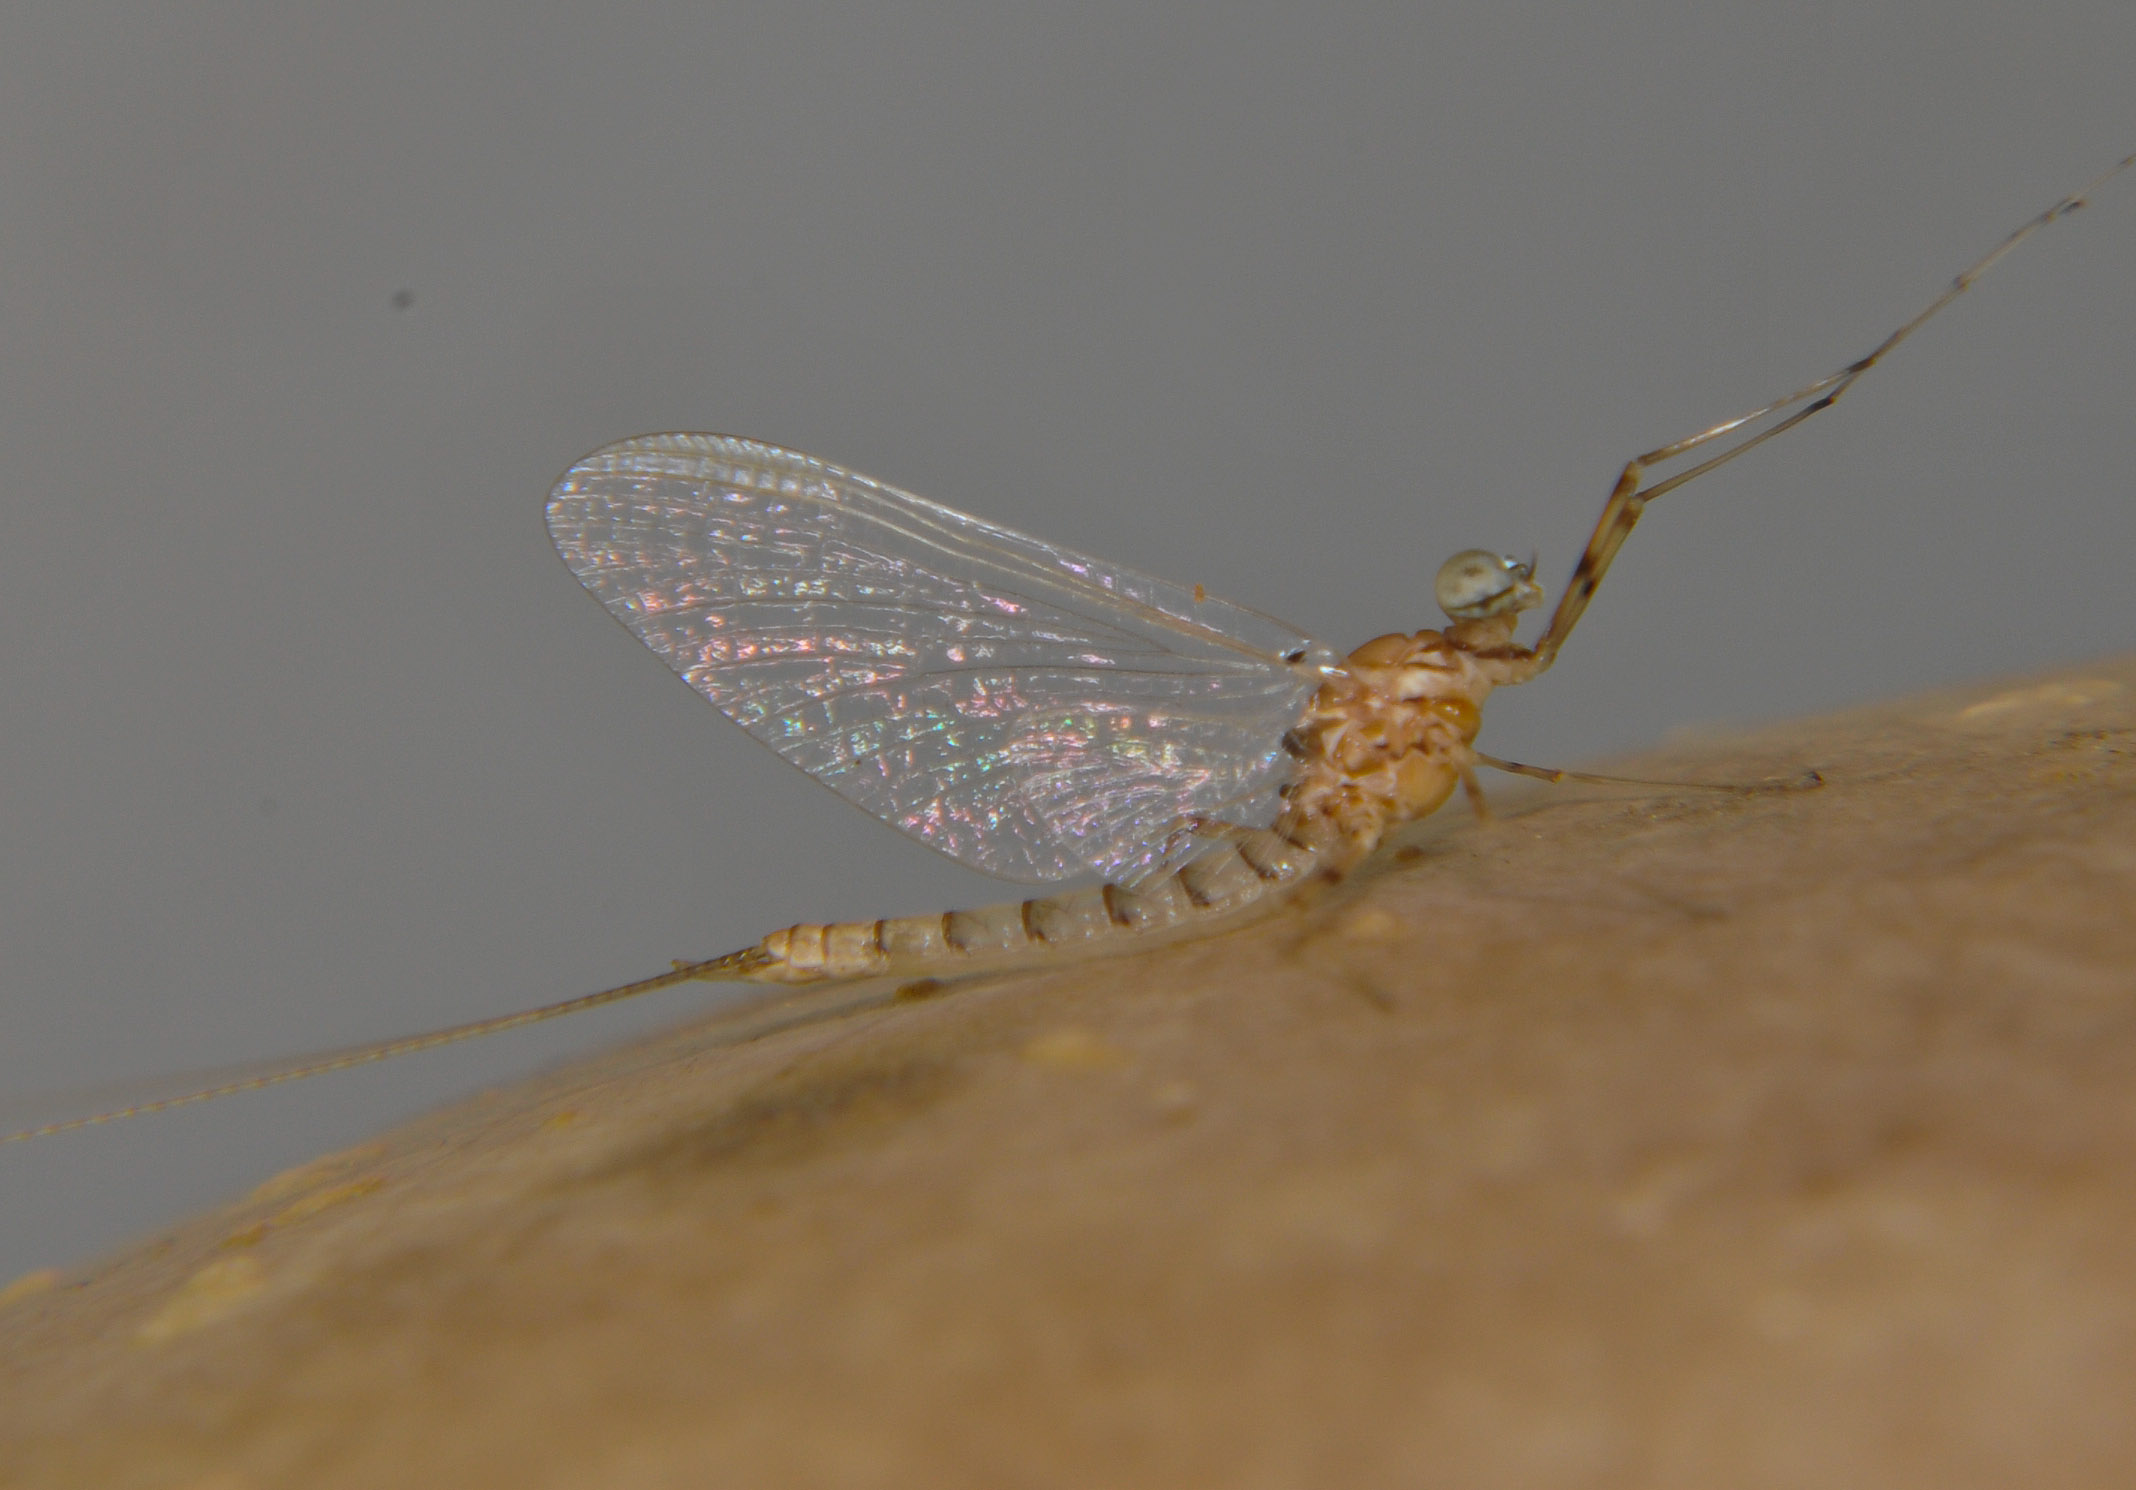 Male Epeorus albertae (Pink Lady) Mayfly Spinner from the Touchet River in Washington